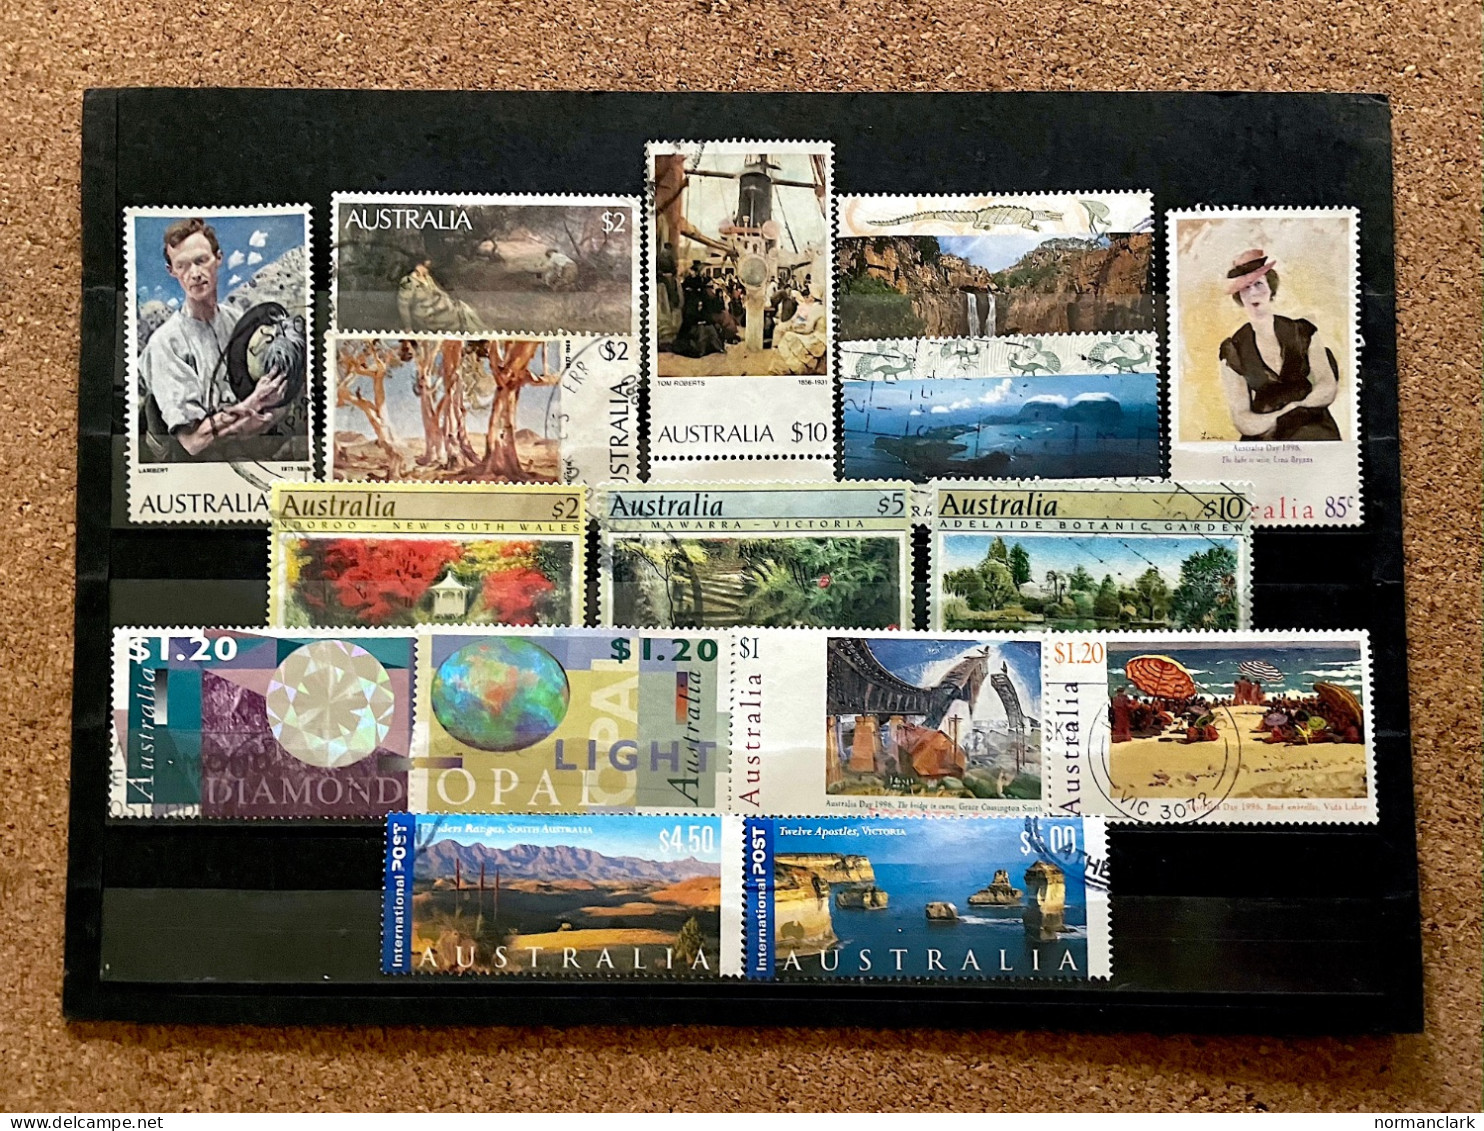 AUSTRALIA 1913 -2000 COLLECTION OF LARGE COMMEMORATIVES & DEFINITIVES (350)